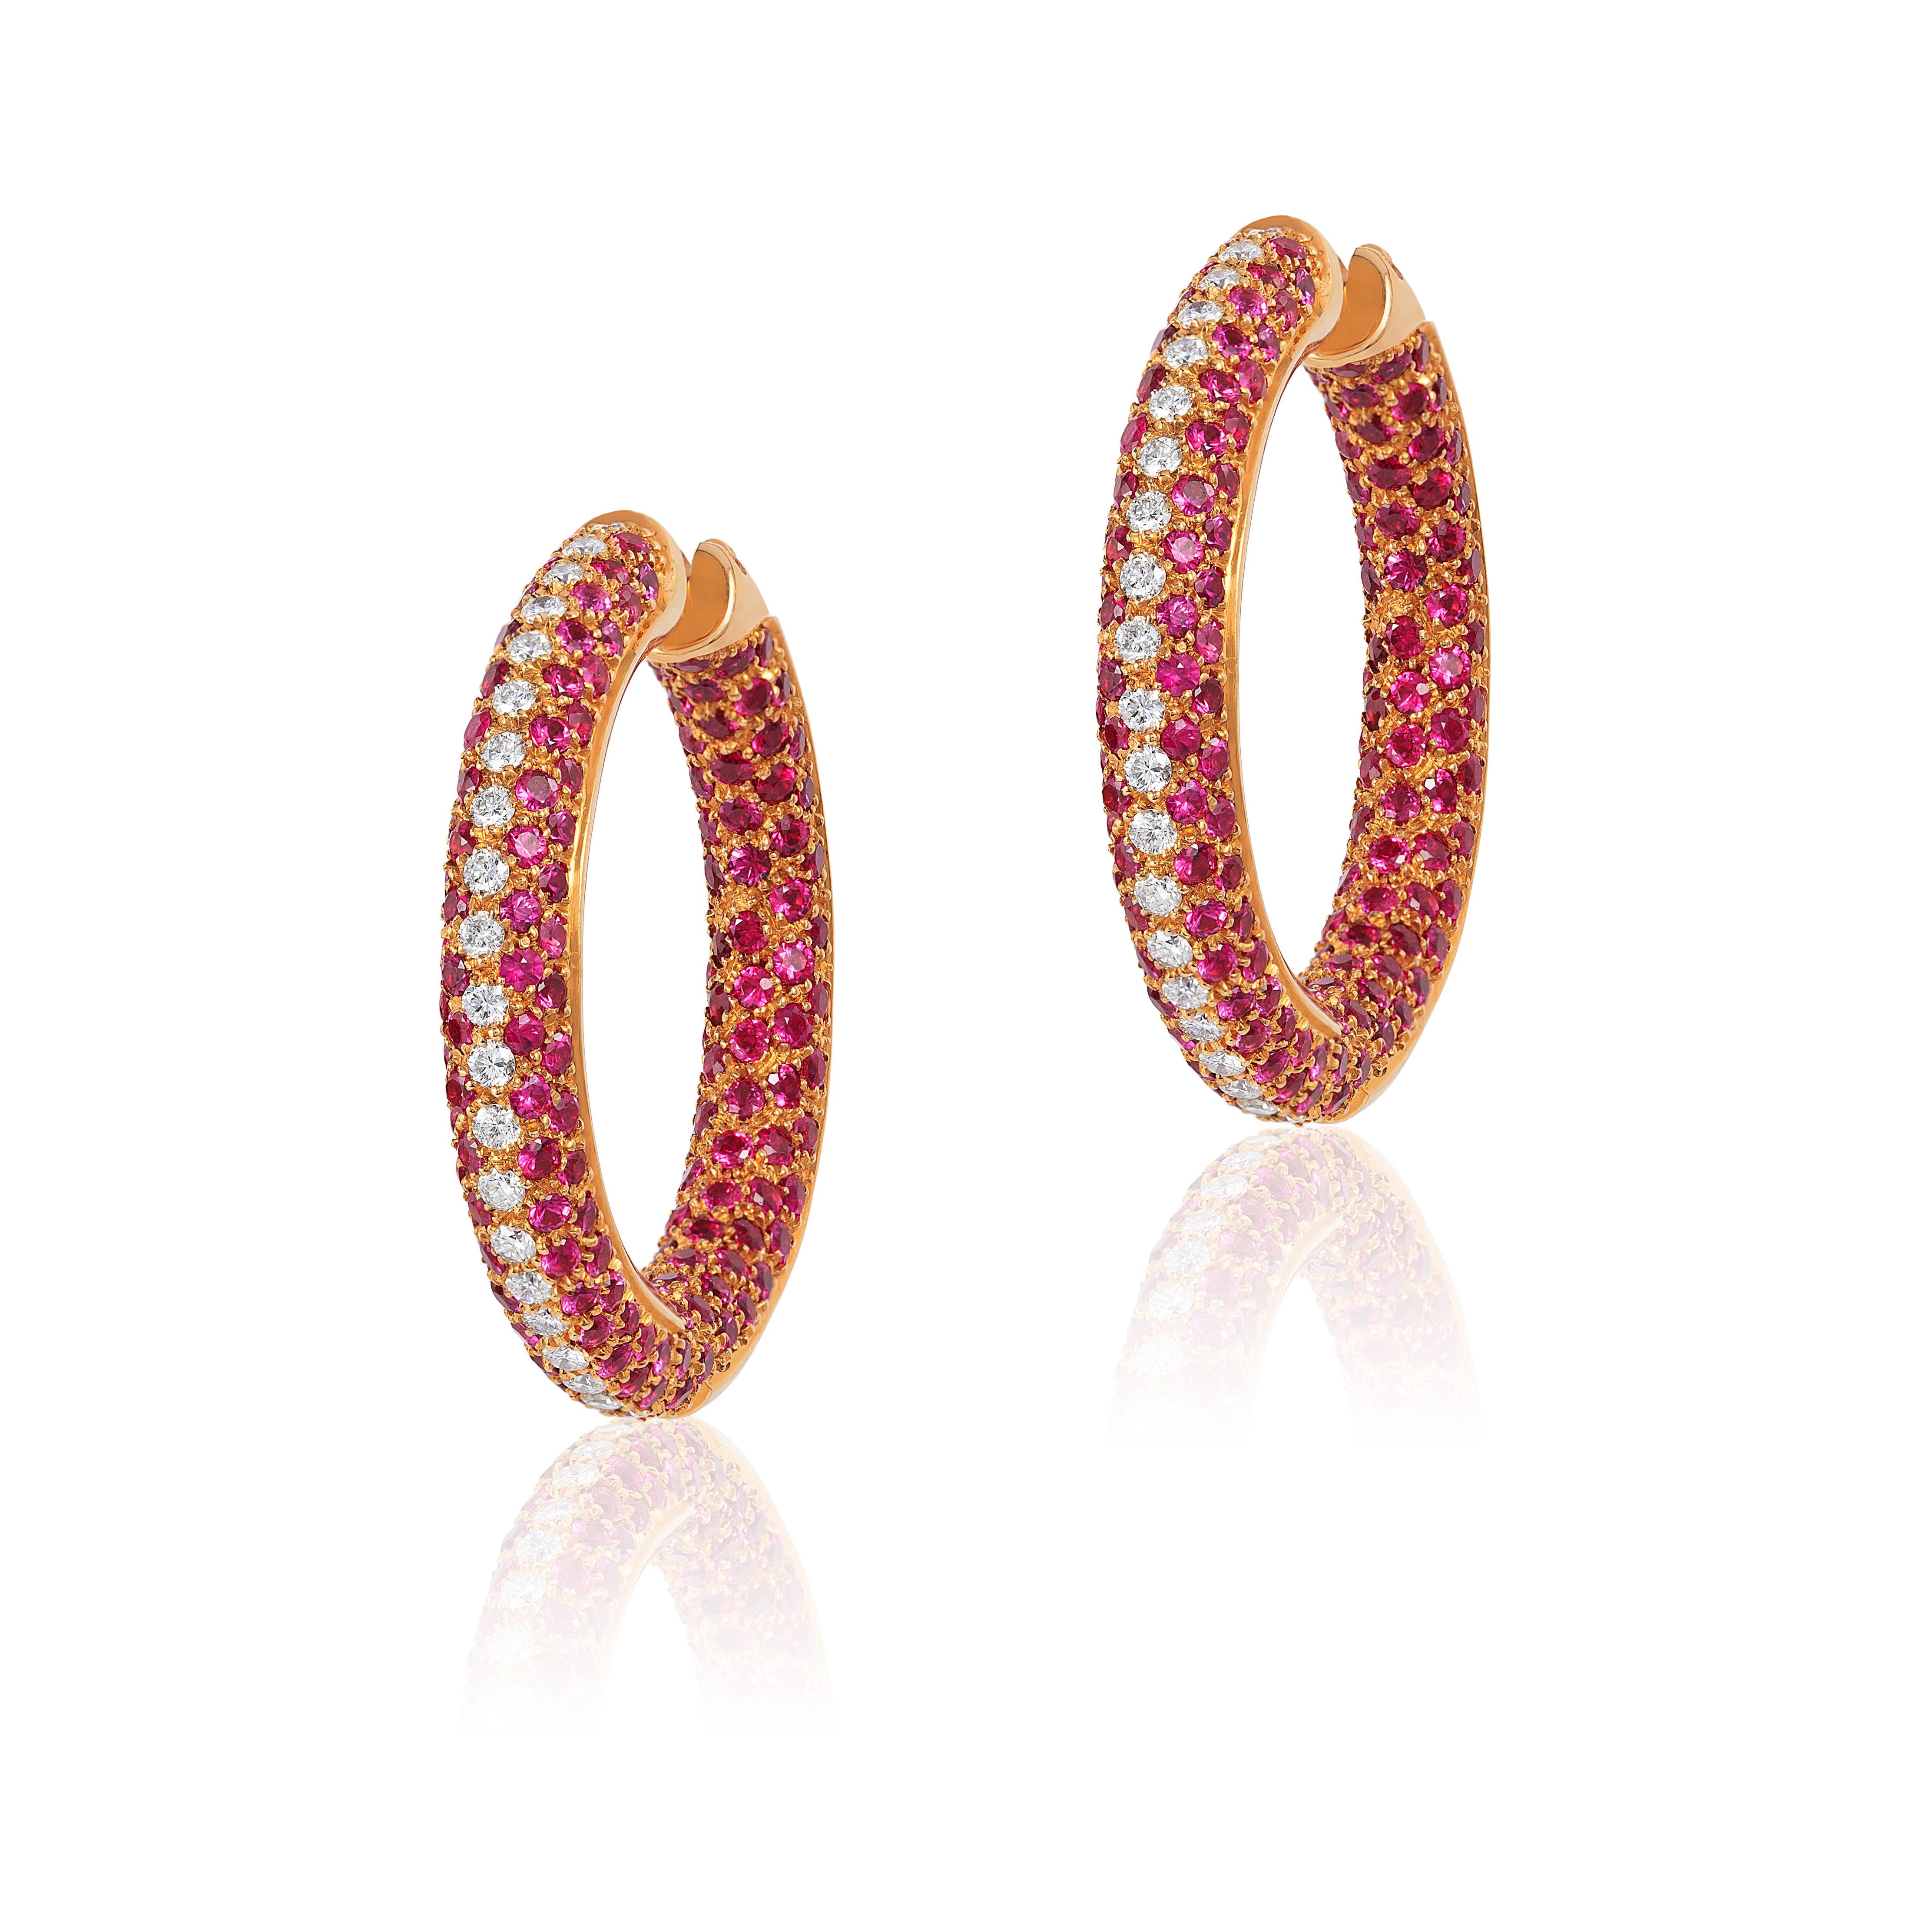 Andreoli Pink Sapphire Diamond Pave 18 Karat Rose Gold Hoop Earrings. These earrigns feature 1.25 carats of F-G-H Color VS-SI Clarity Brilliant round cut diamonds, 10.22 carats of round pave pink sapphires set in 34.80 grams of 18 Karat Rose Gold.